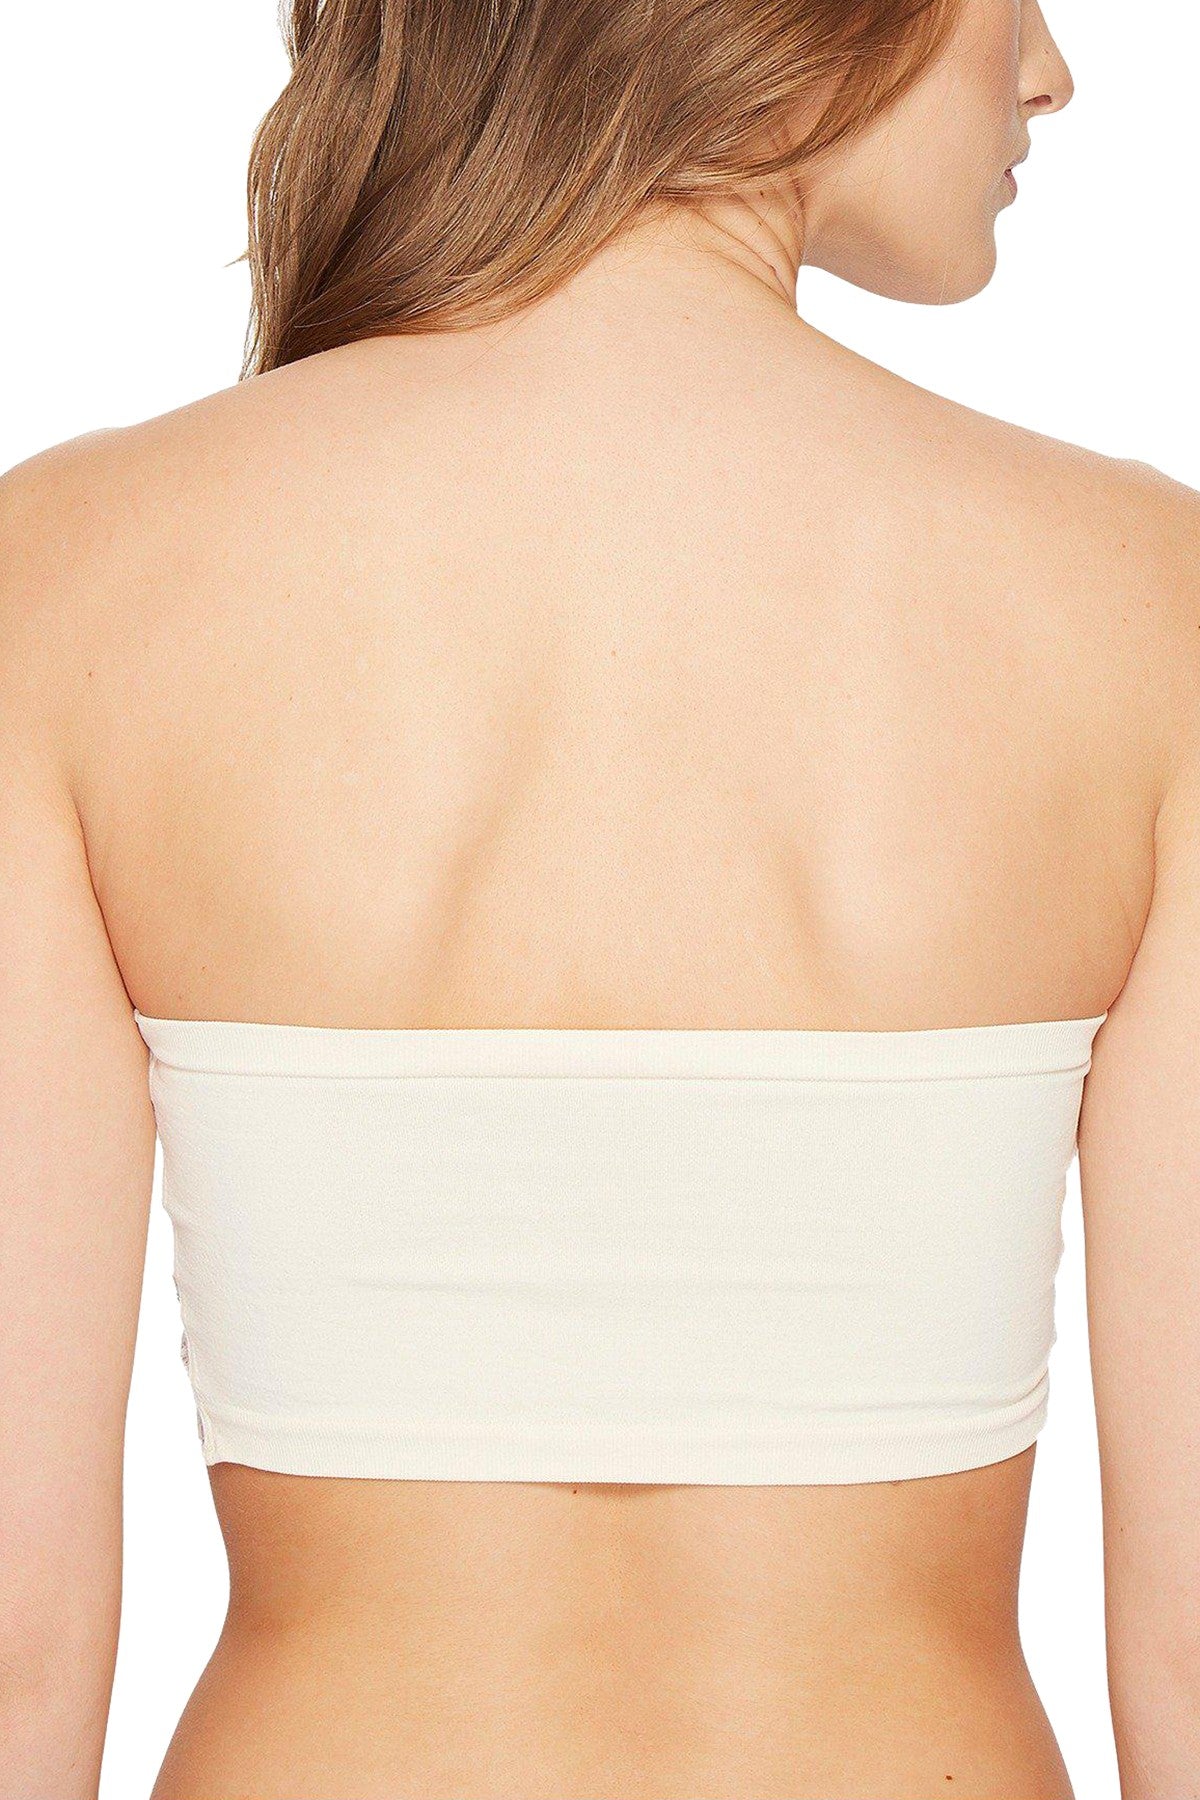 Free People Ivory Reversible Seamless Lace Bandeau Bralette – CheapUndies